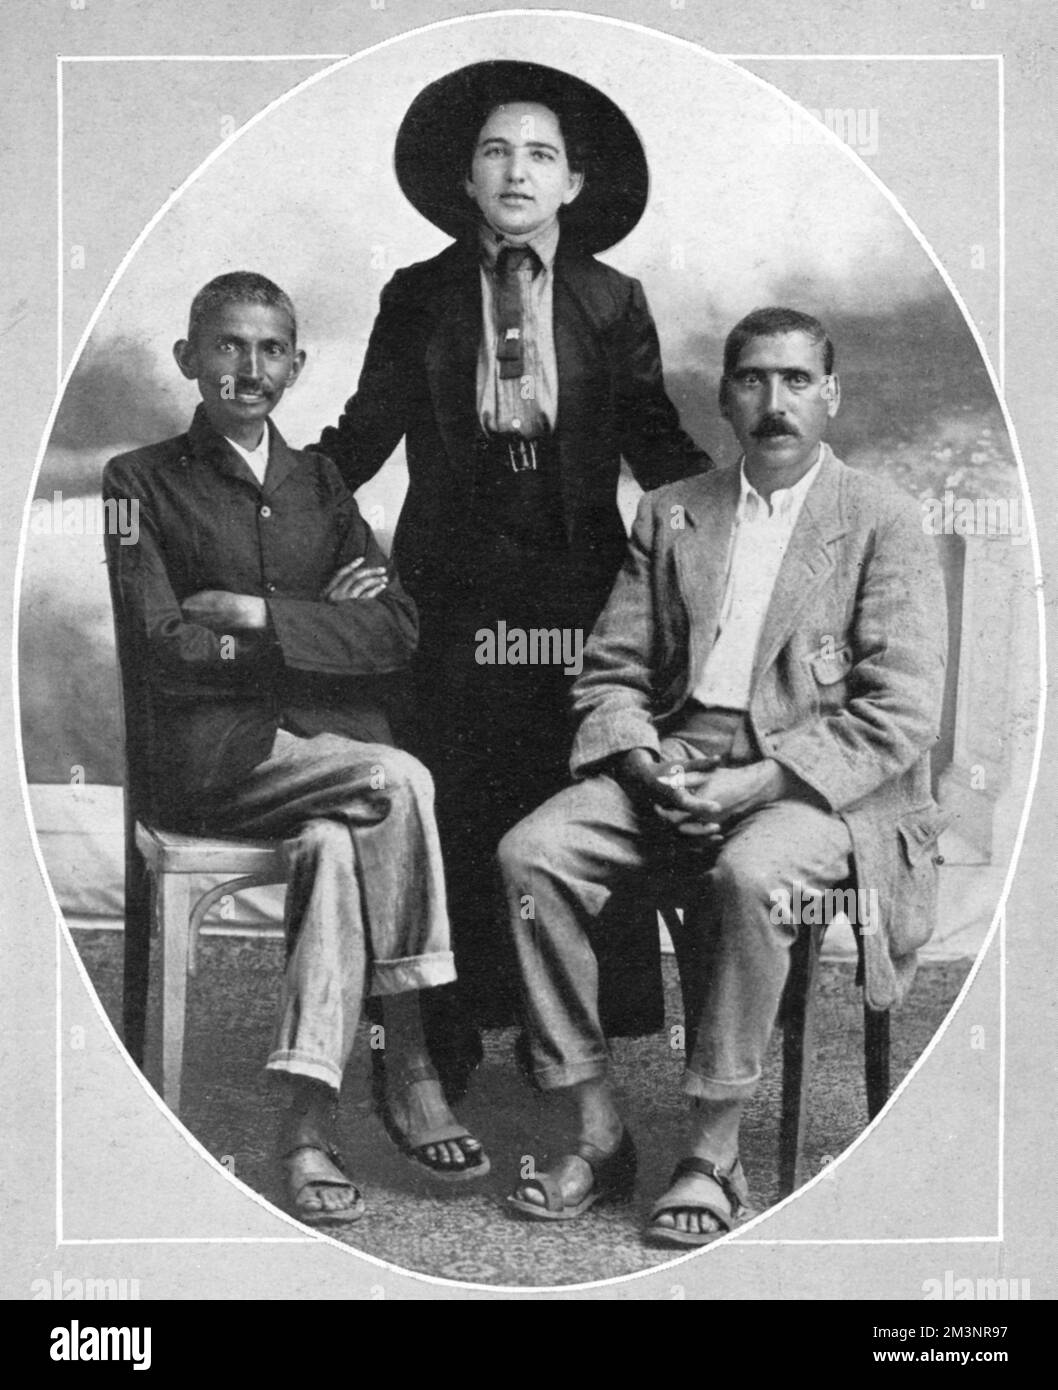 Mahatma Gandhi (1869 - 1948), Indian independence leader, during his time in South Africa when he was leader of the South African Indians and campaigned for them to be given equal rights to other British citizens.  Pictured with him are his secretary, Sonja Schlesin and his assistant, Hermann Kallenbach.     Date: 1913 Stock Photo